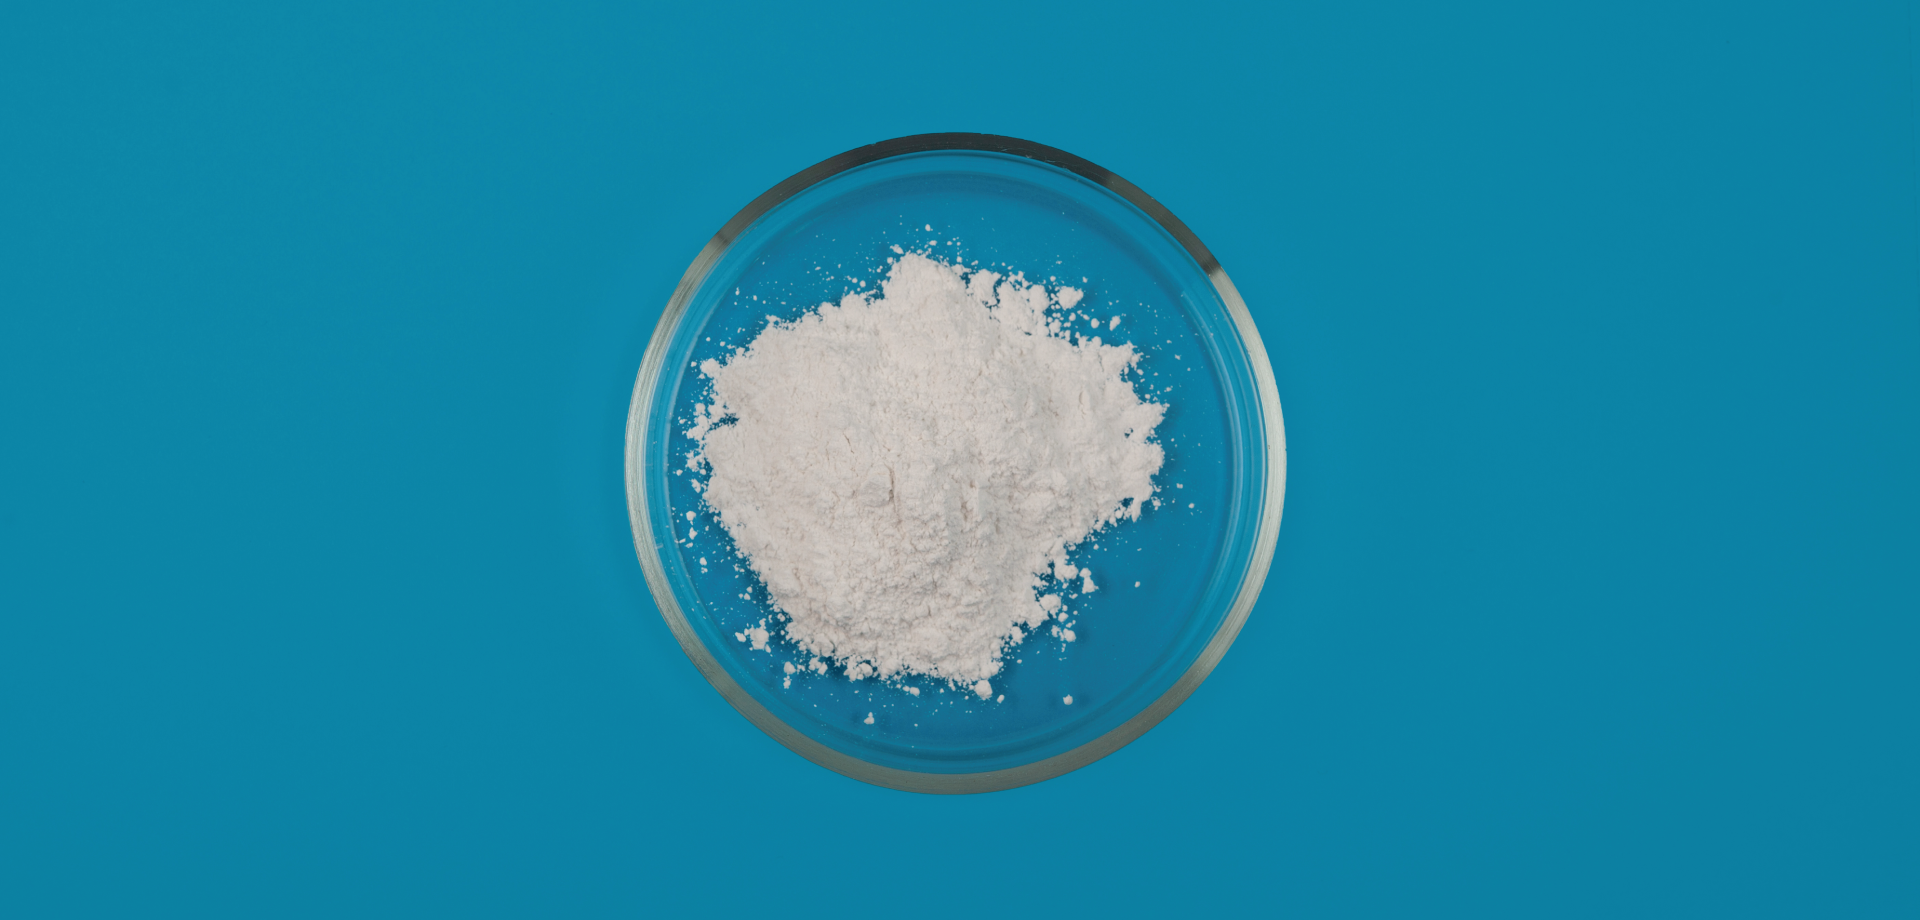 Overhead shot of white powder in a clear bowl on a blue surface top